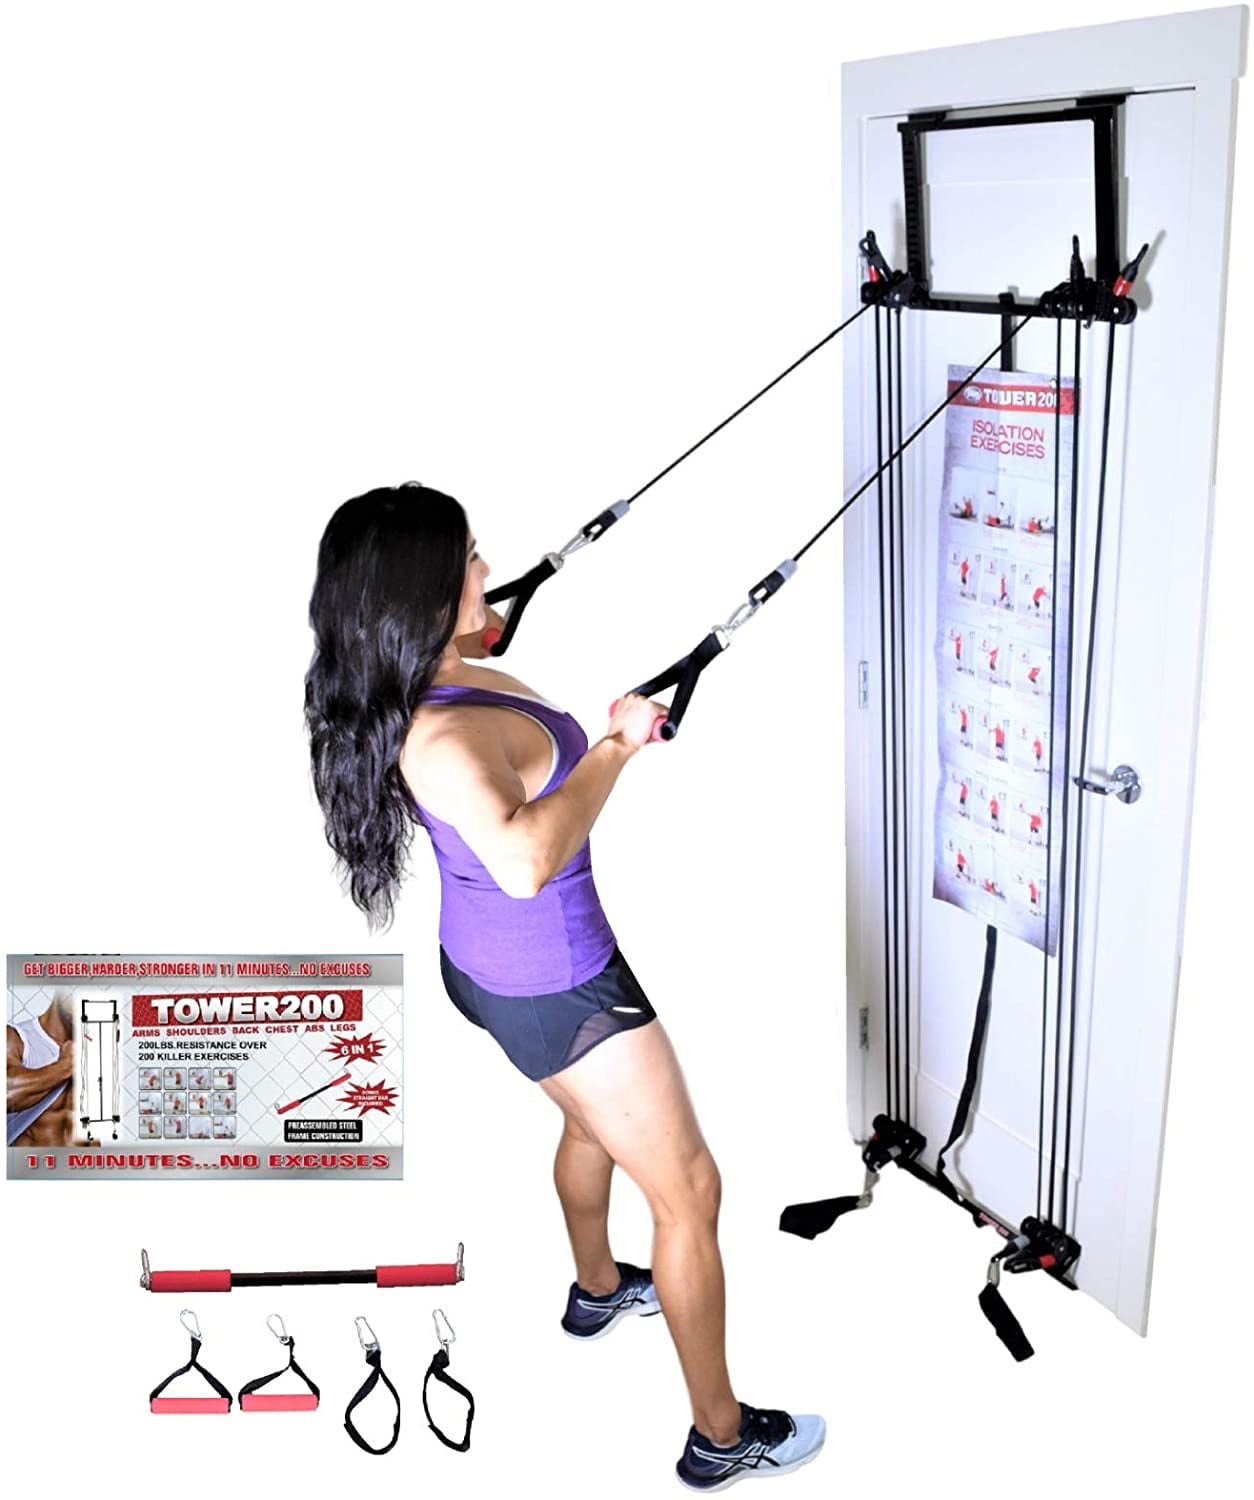 Workout System Strength Training including Straight Resistance Bar, DVD, Exercise Chart